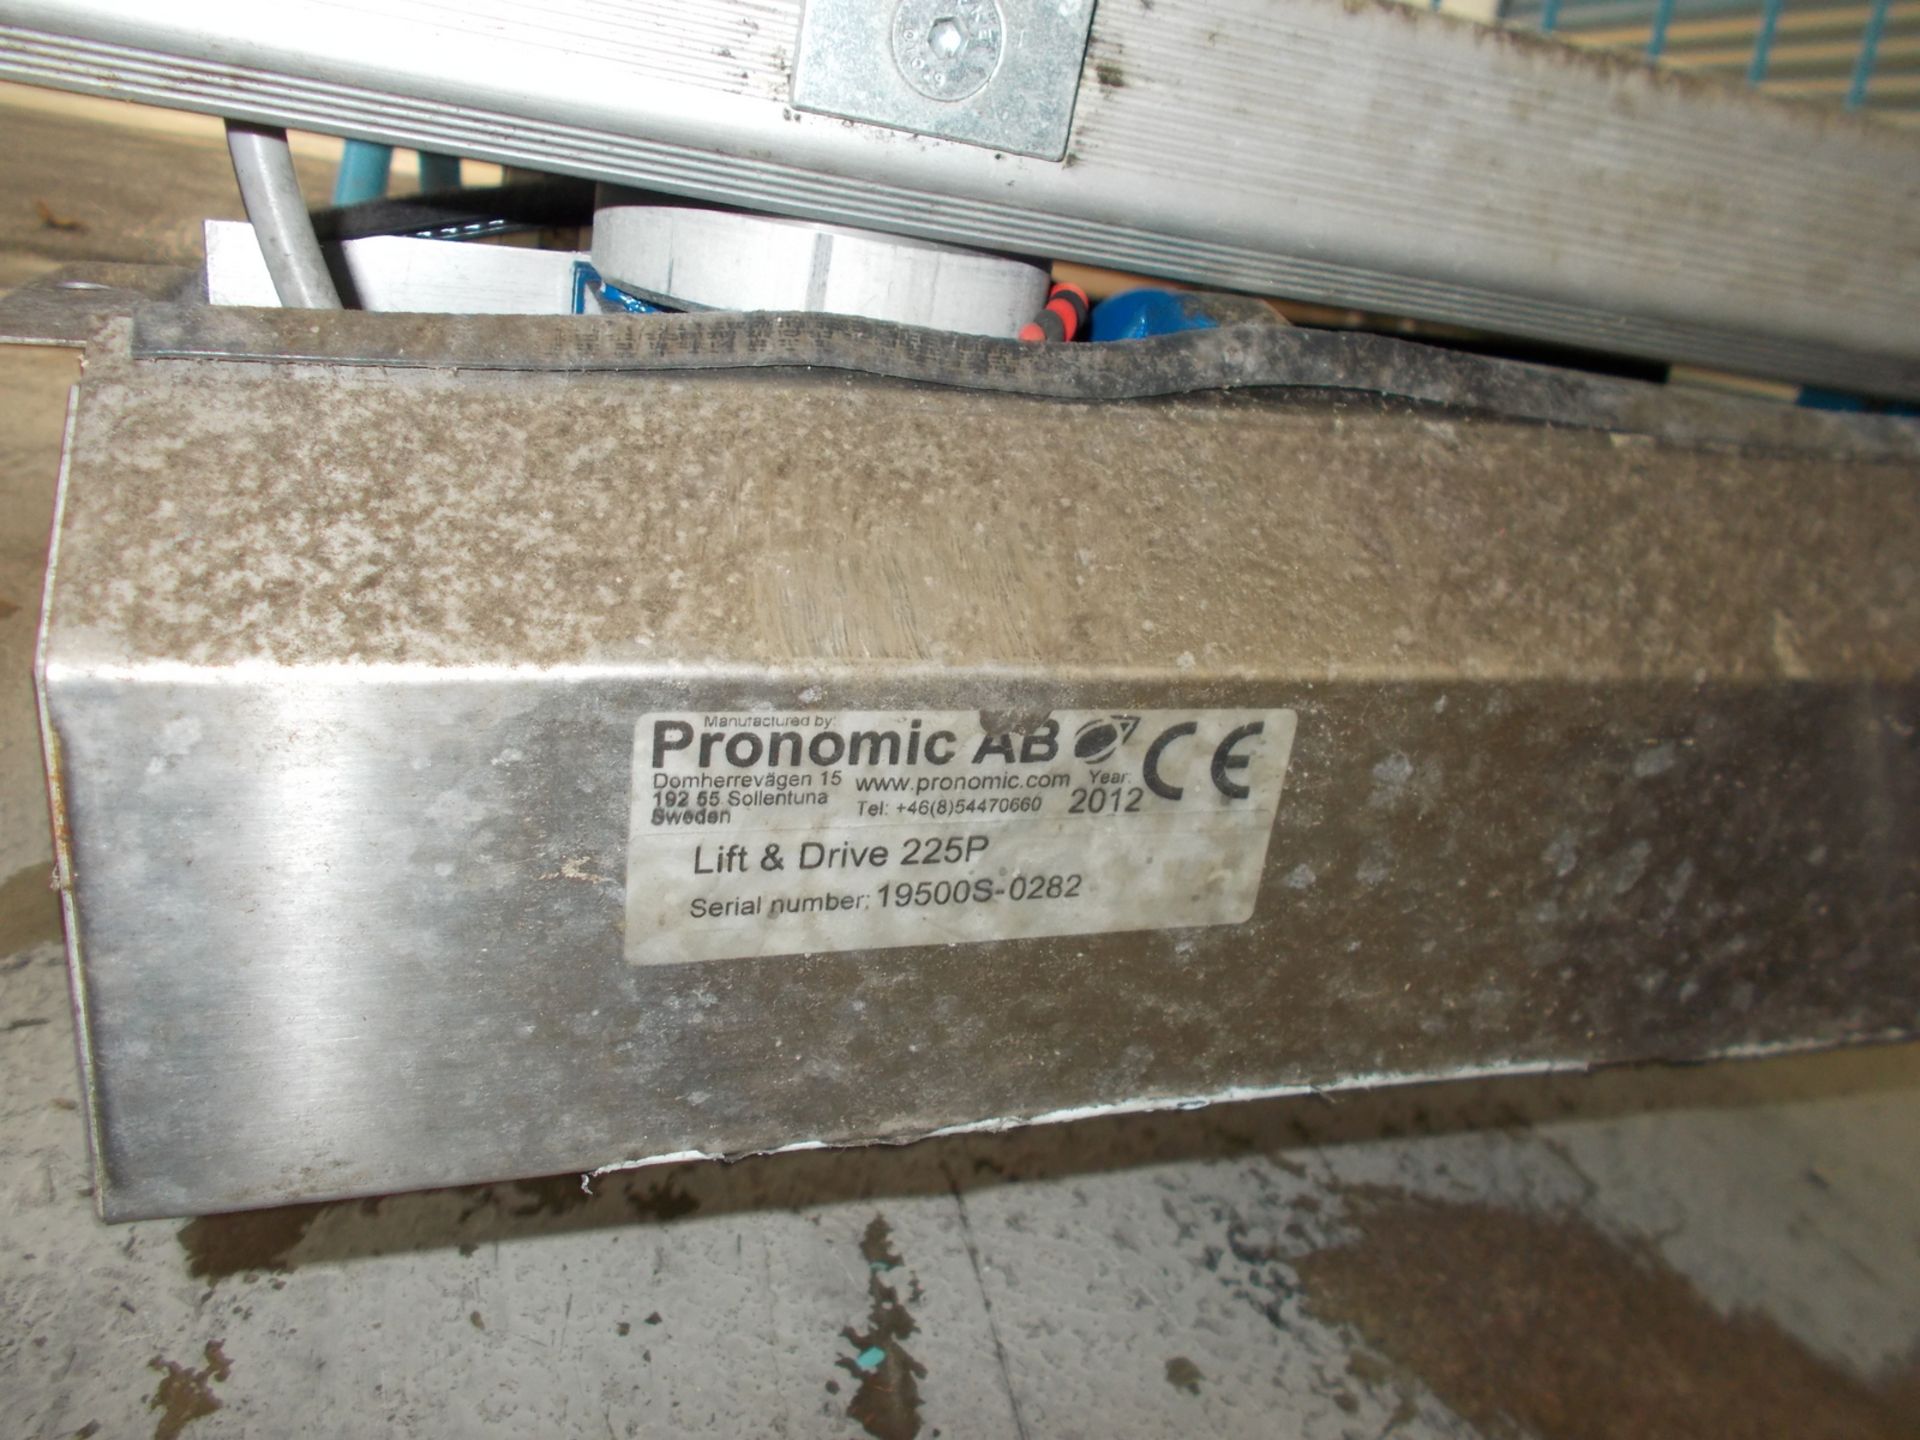 Pronomic 'Lift & drive 225P stand l-o-squeeze' pedestrian operated electric lifting device - Image 4 of 5